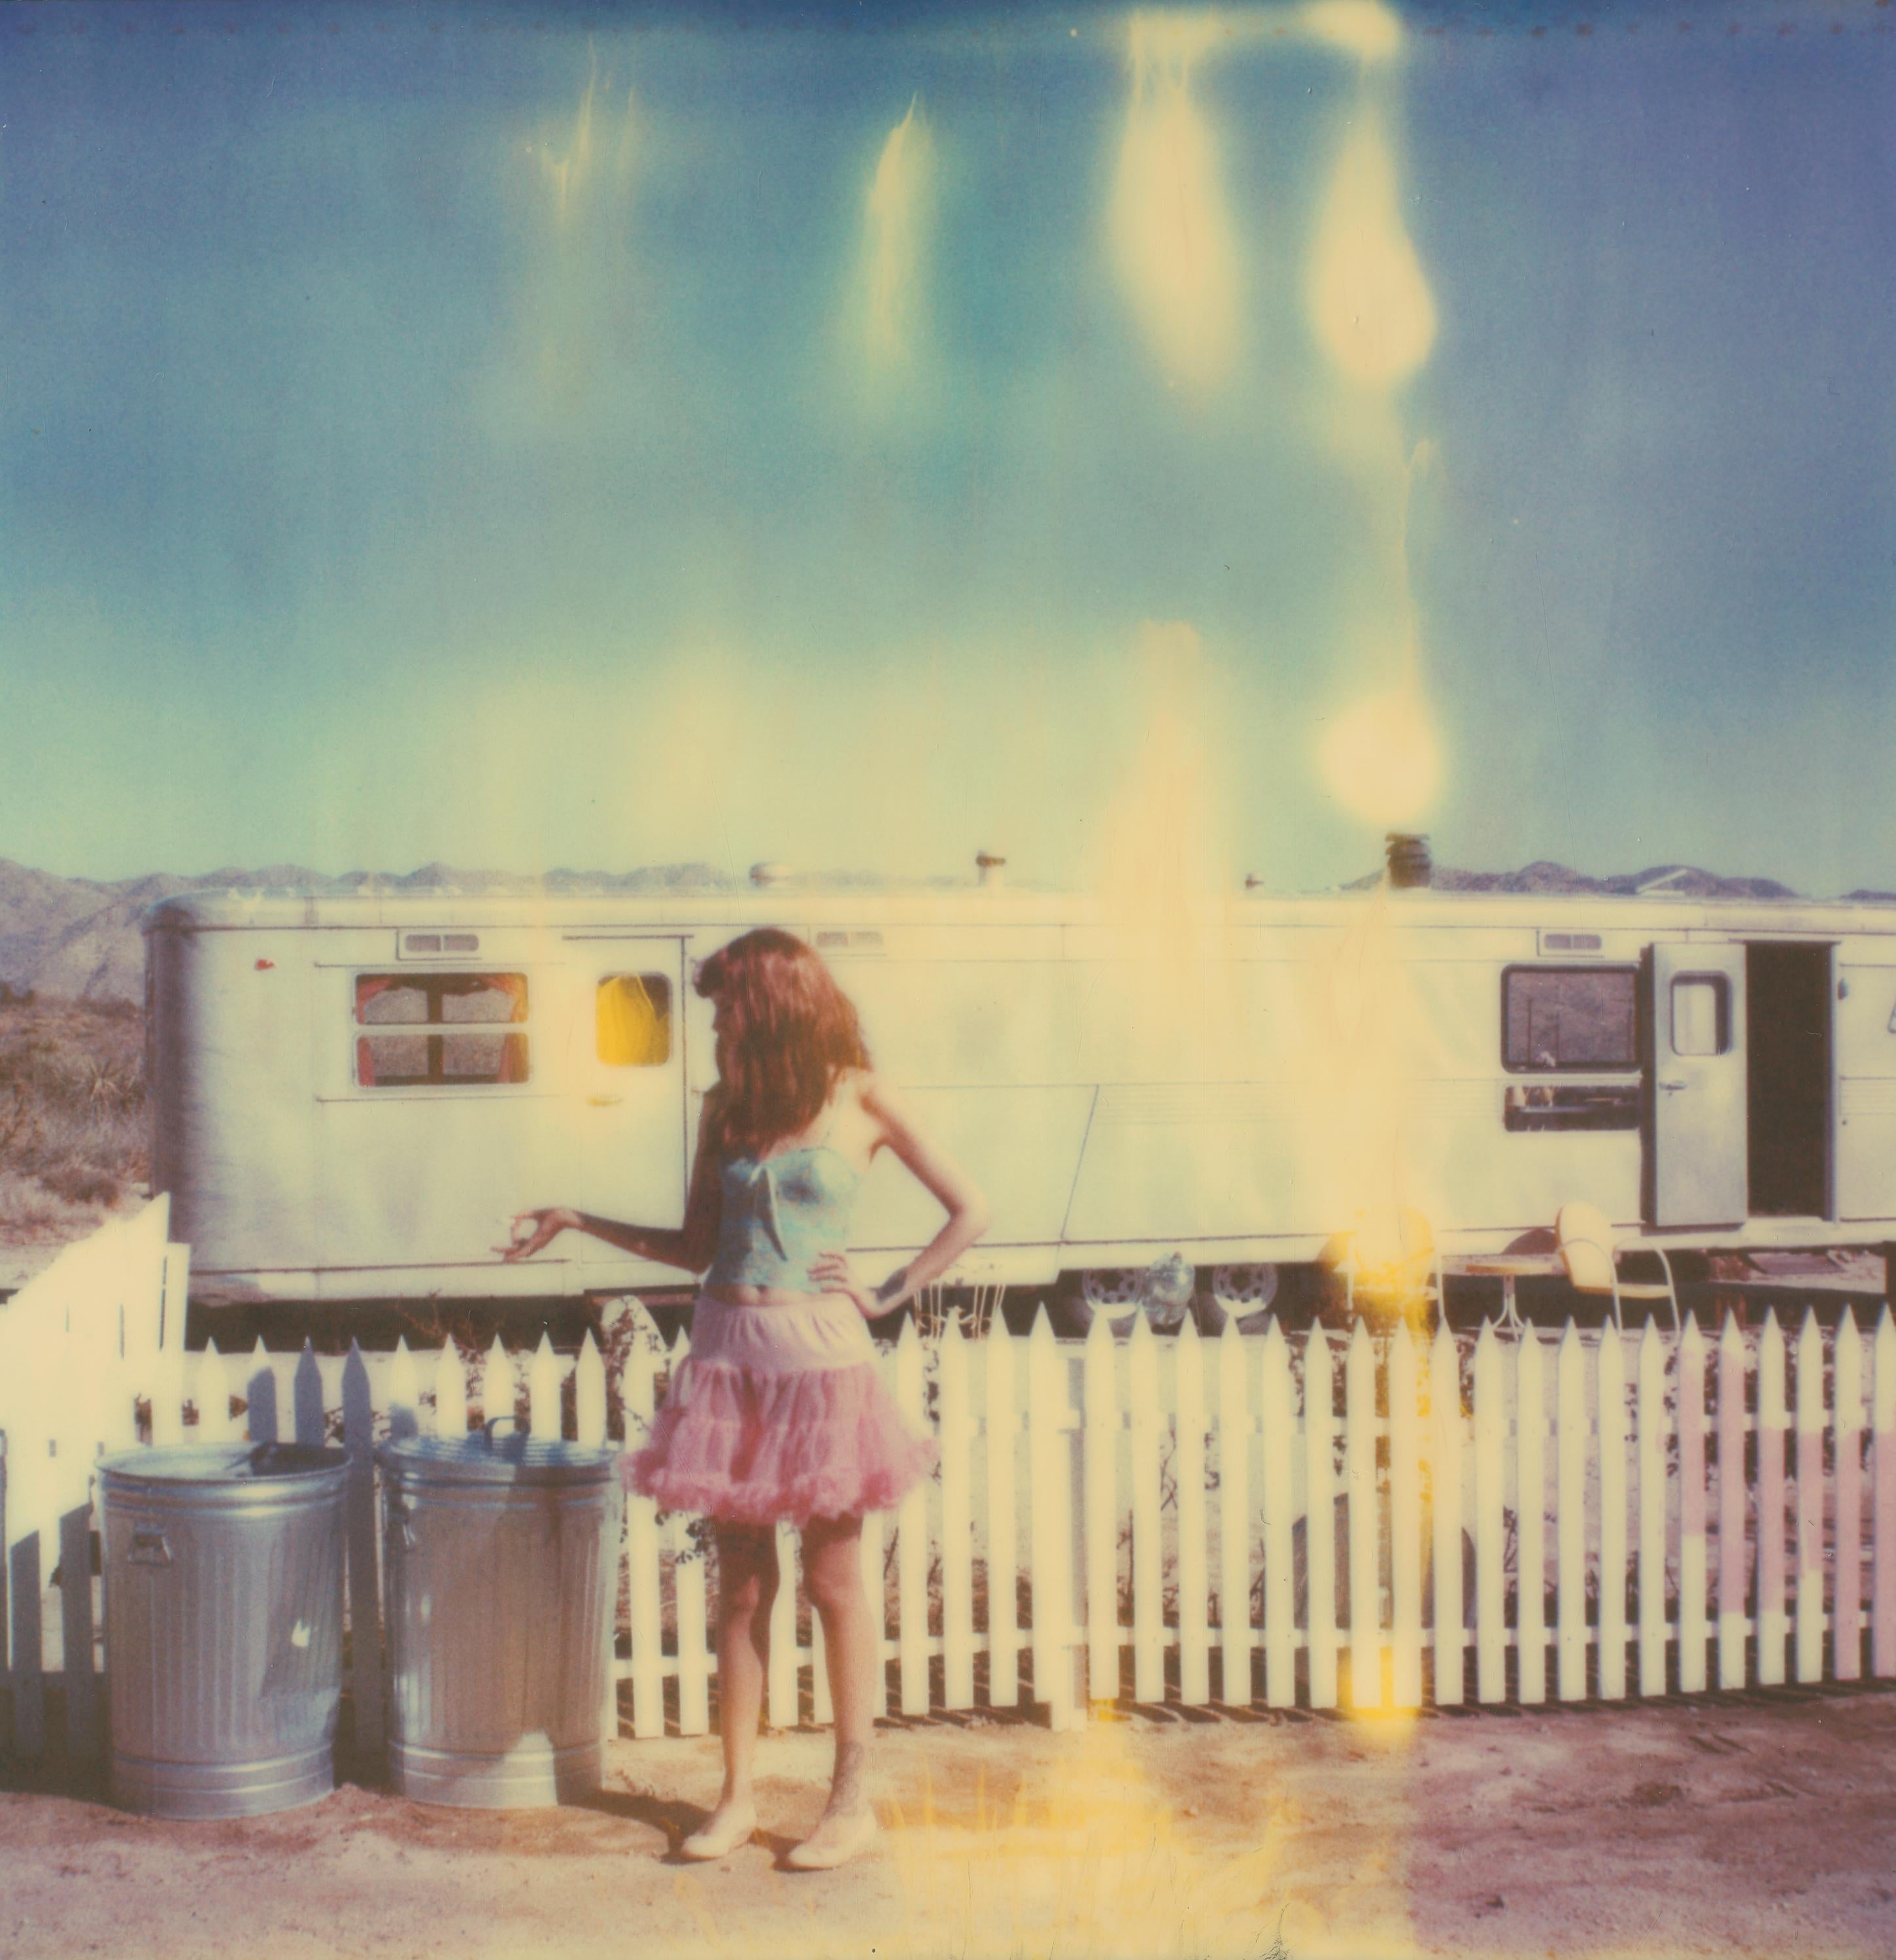 Stefanie Schneider Color Photograph - Making Magic (The Girl behind the White Picket Fence)